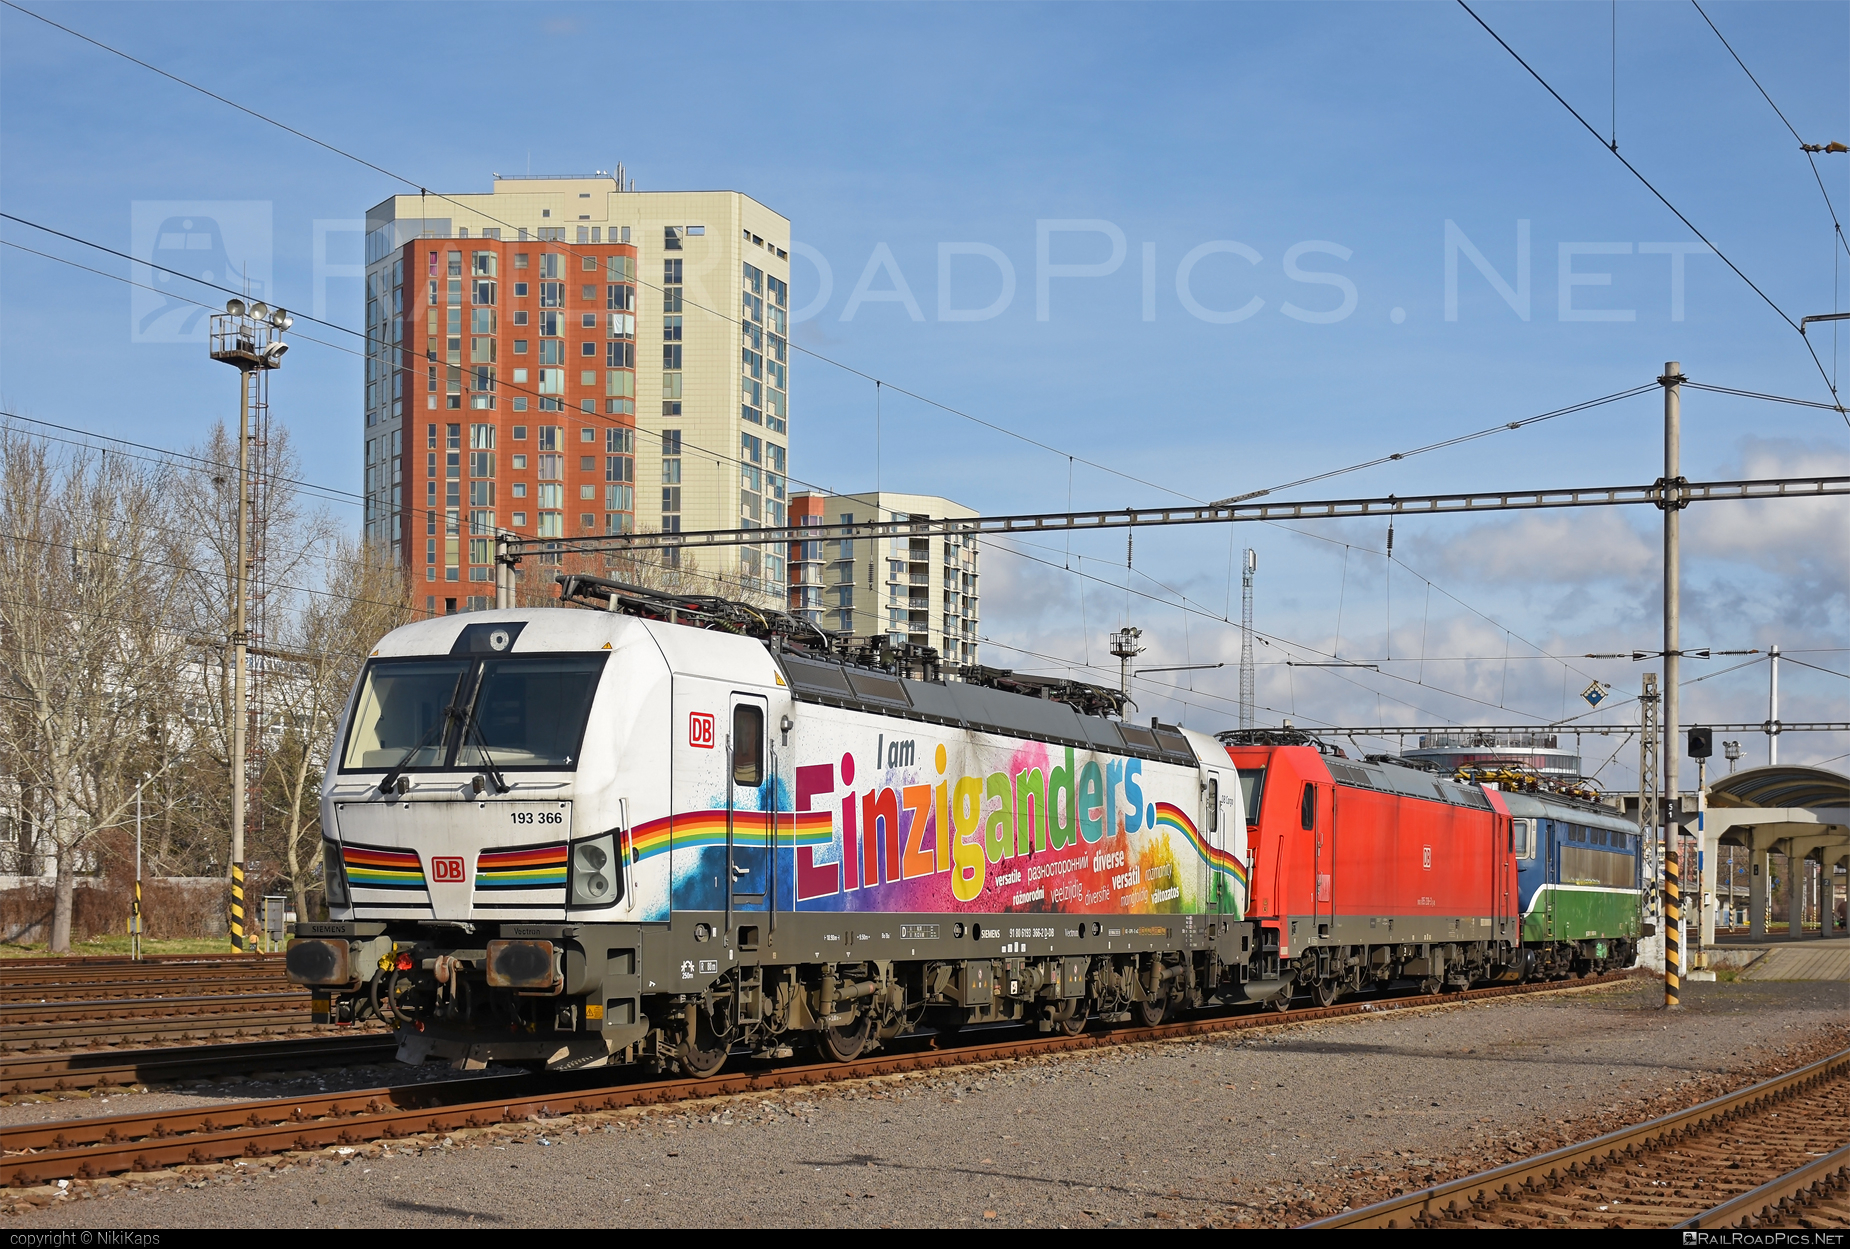 Siemens Vectron MS - 193 366 operated by DB Cargo AG #db #dbcargo #dbcargoag #deutschebahn #siemens #siemensVectron #siemensVectronMS #vectron #vectronMS